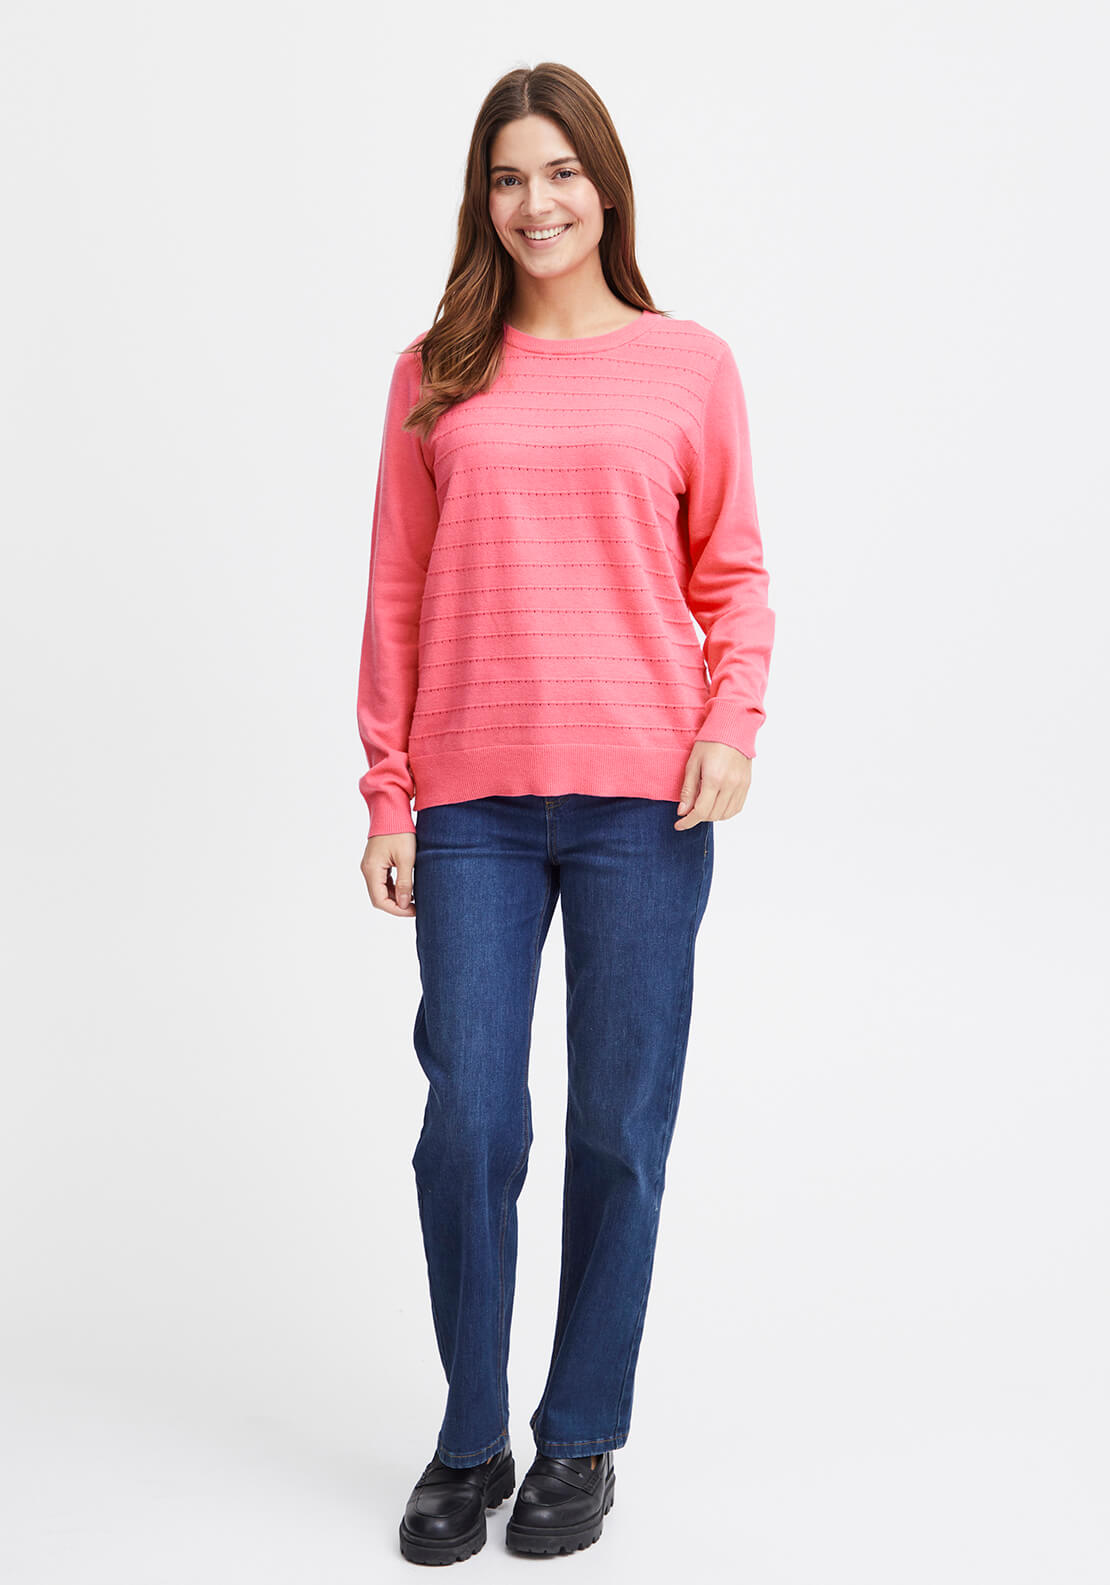 Fransa Knit Pullover 5 Shaws Department Stores